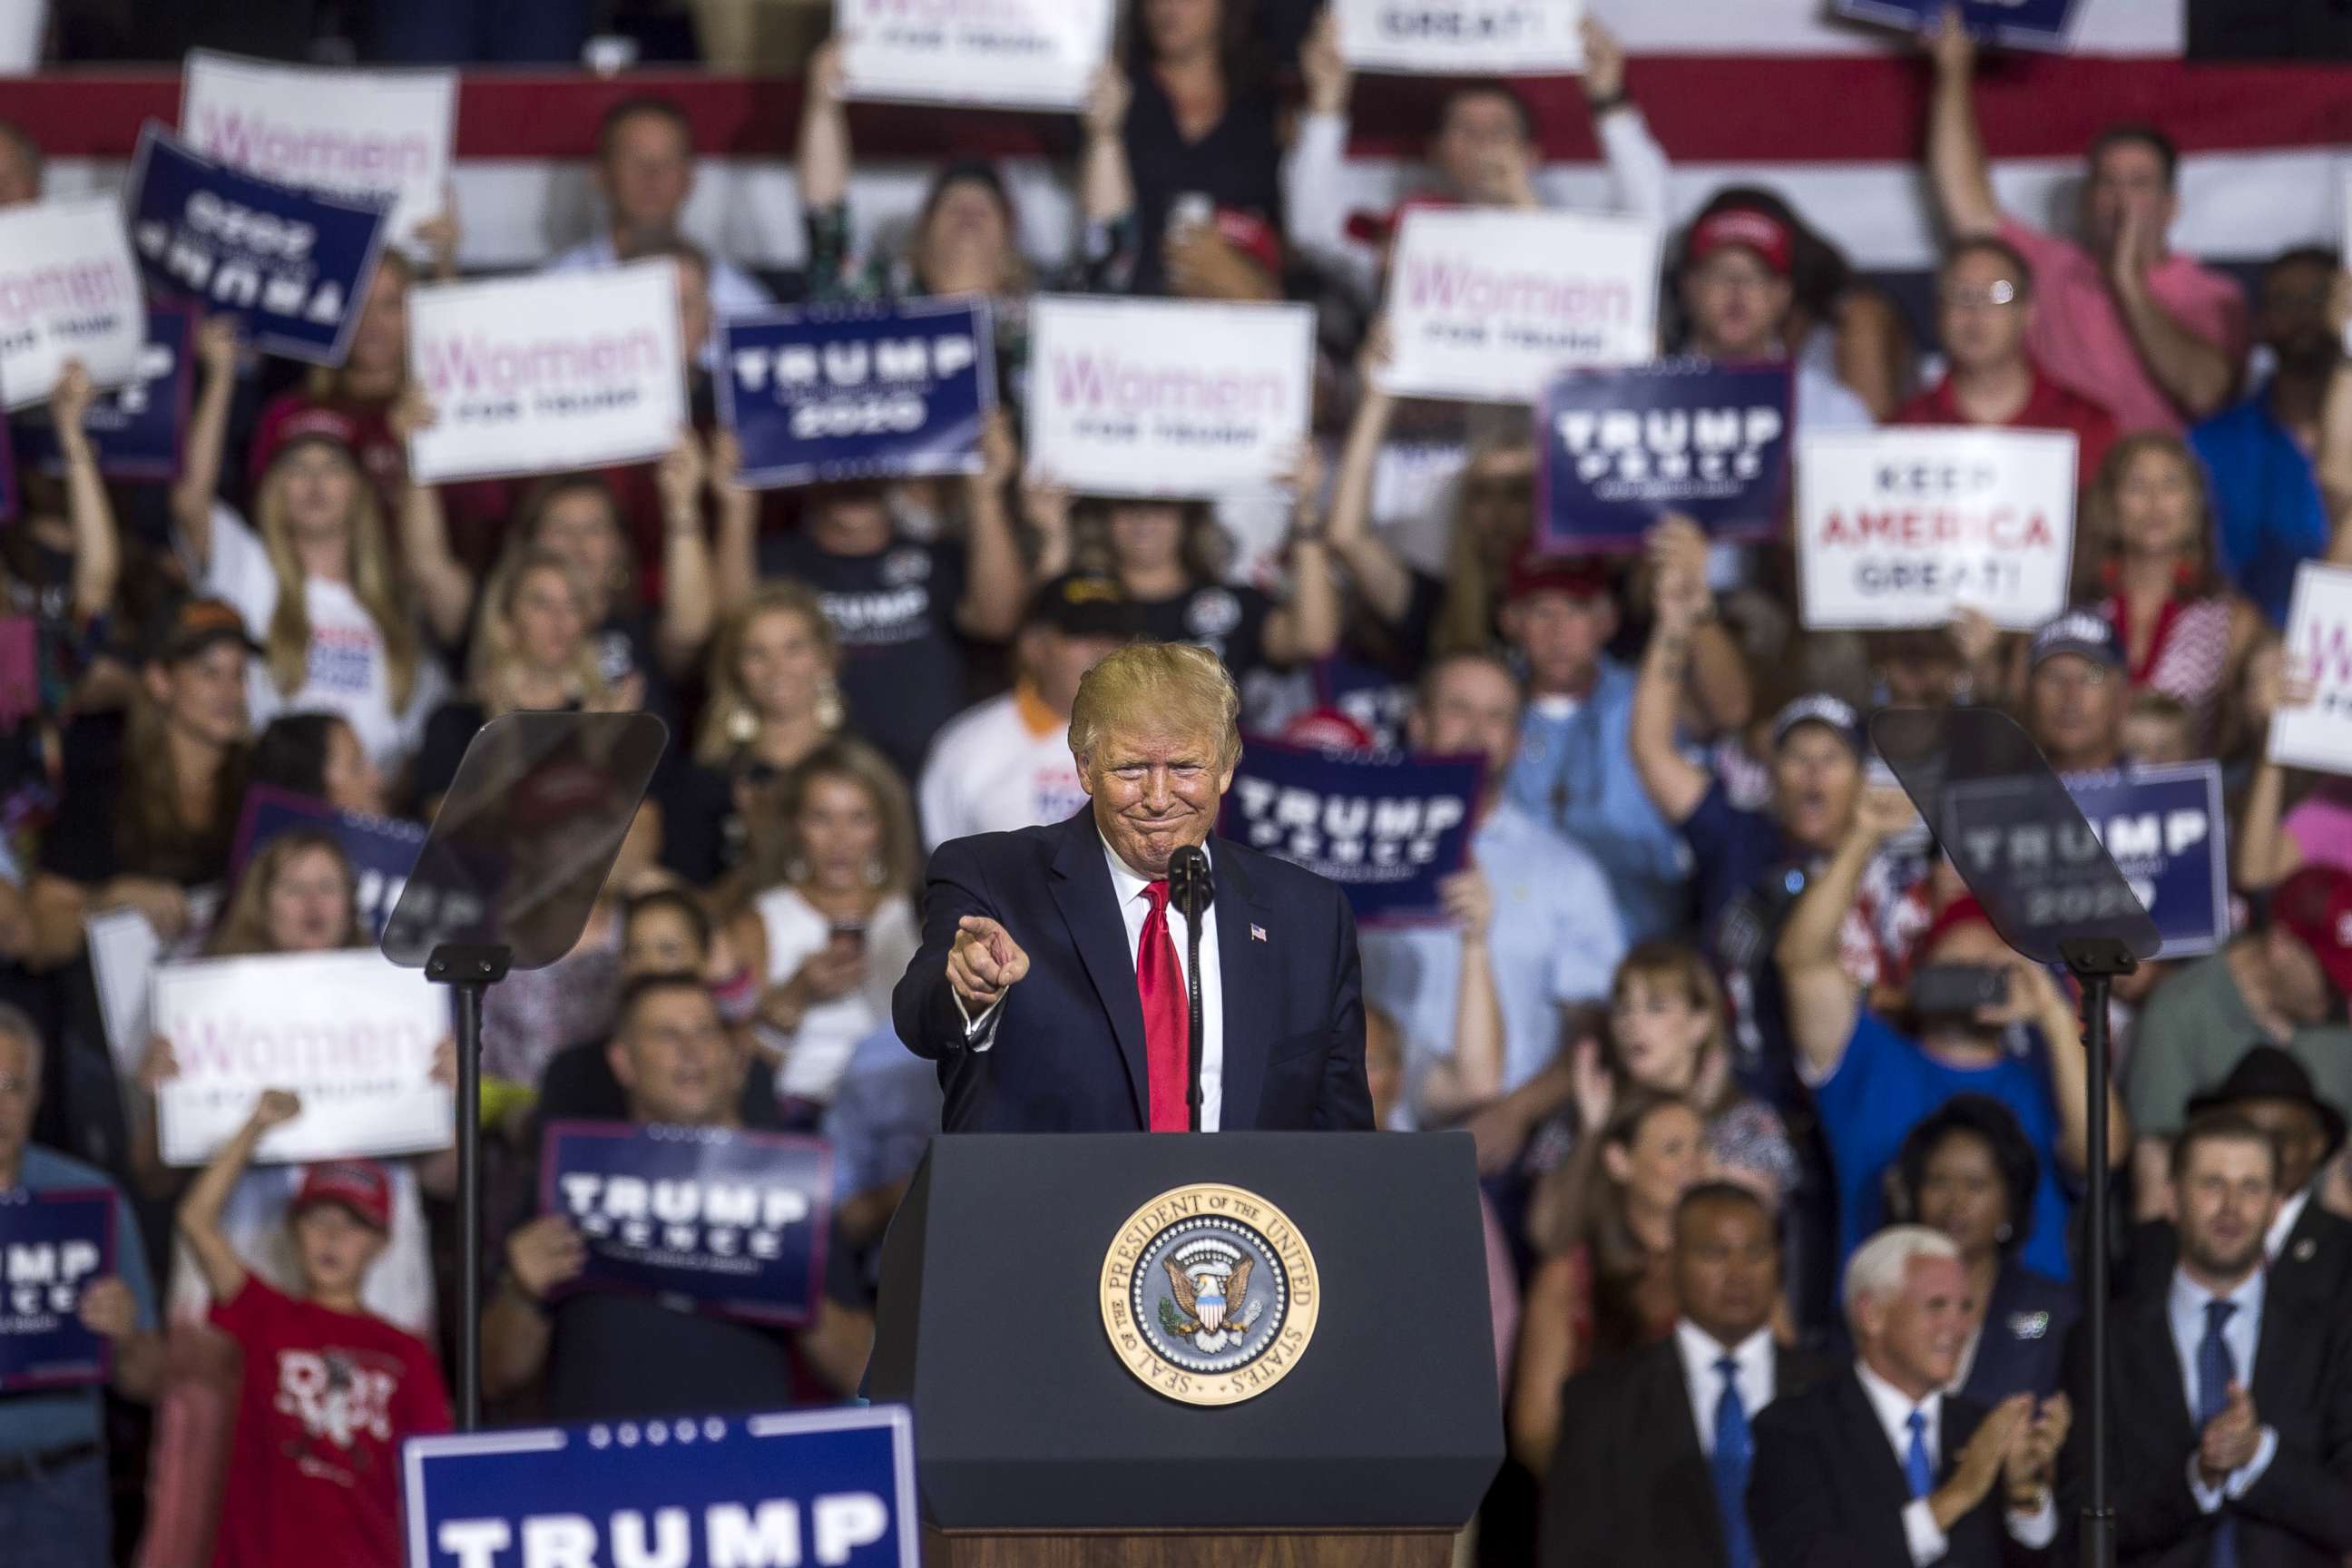 PHOTO: President Donald Trump speaks during a Keep America Great rally, July 17, 2019, in Greenville, North Carolina.